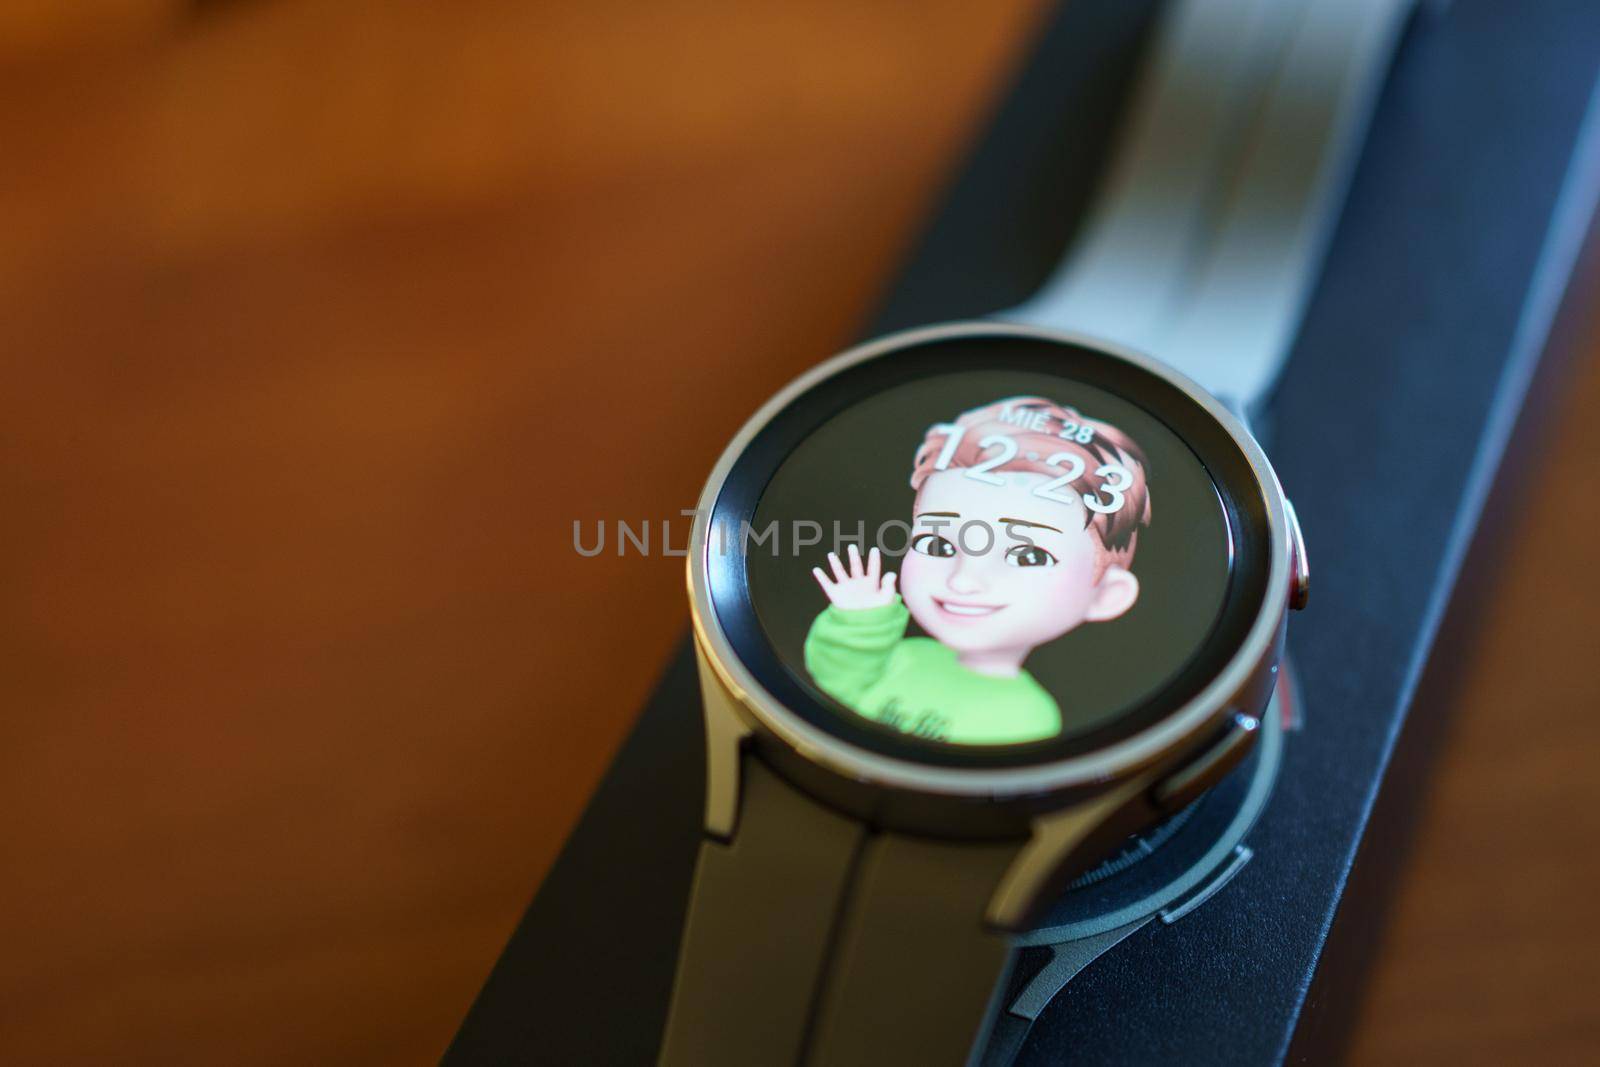 Granada, Andalusia, Spain - September 28, 2022: New Samsung Watch 5 Pro with watch face of AR Emoji by javiindy